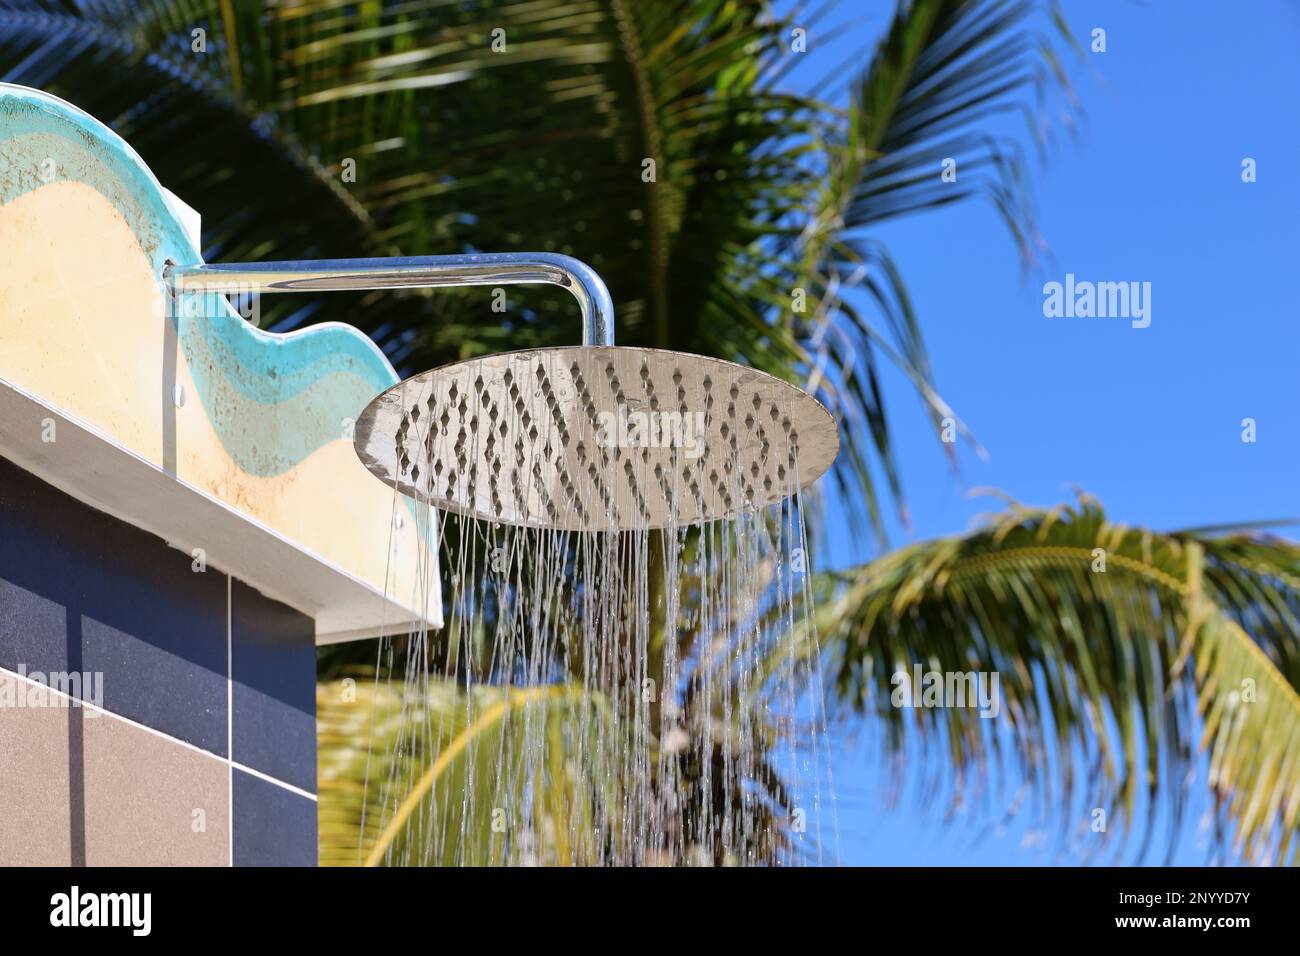 Tropical shower, water jets pour on palm trees background. Beach resort and vacation concept Stock Photo